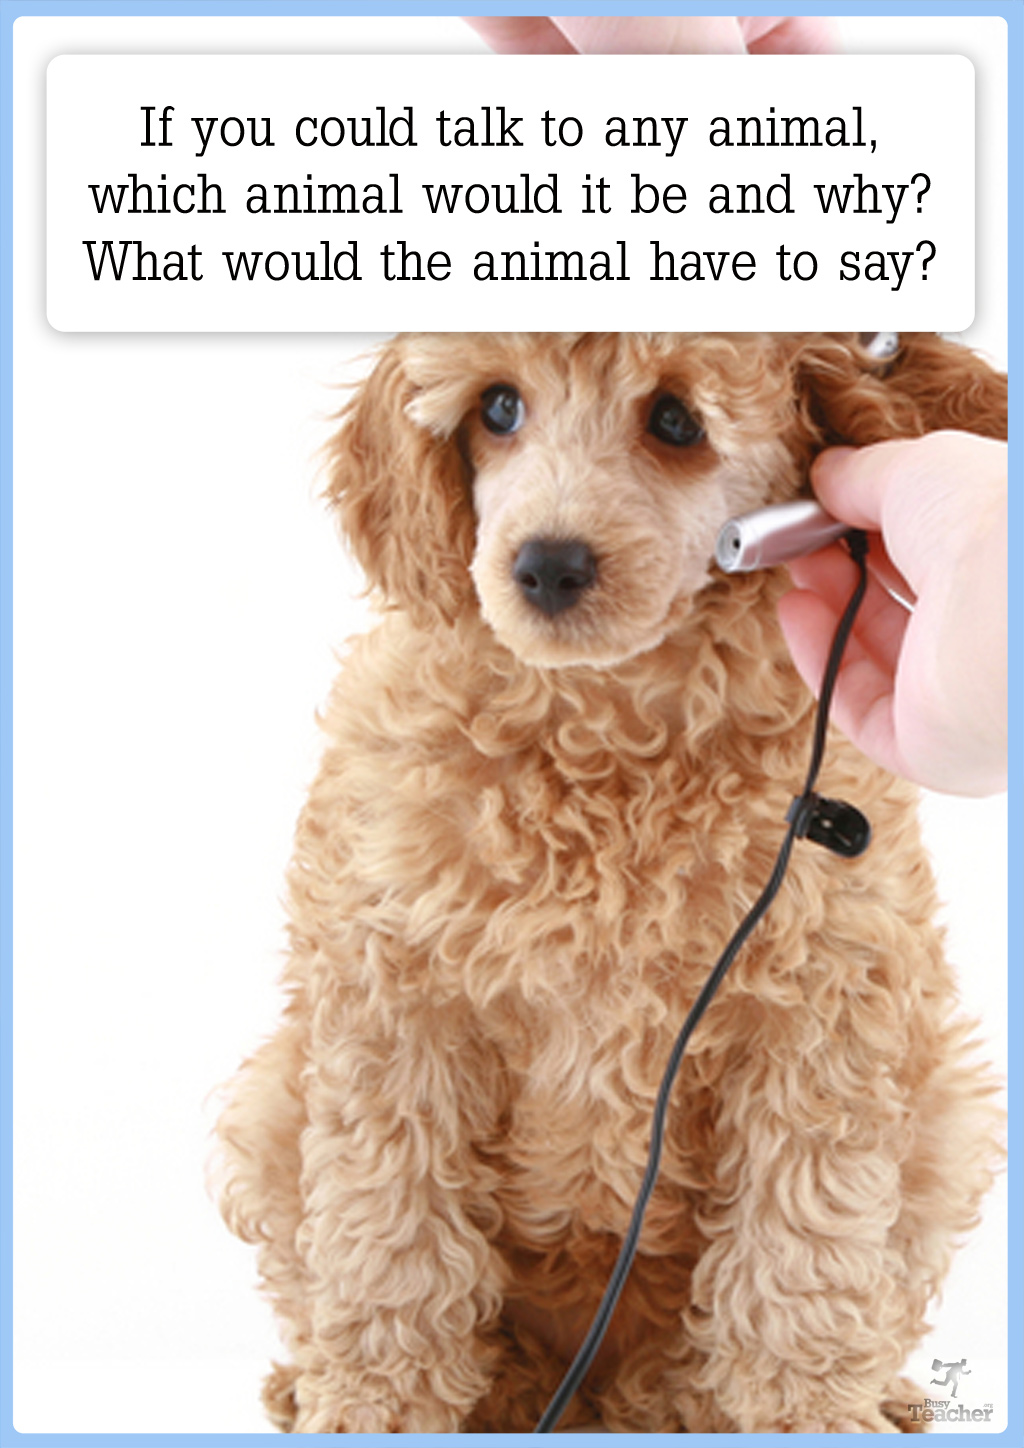 If You Could Talk To Any Animal...? [CREATIVE WRITING PROMPT]